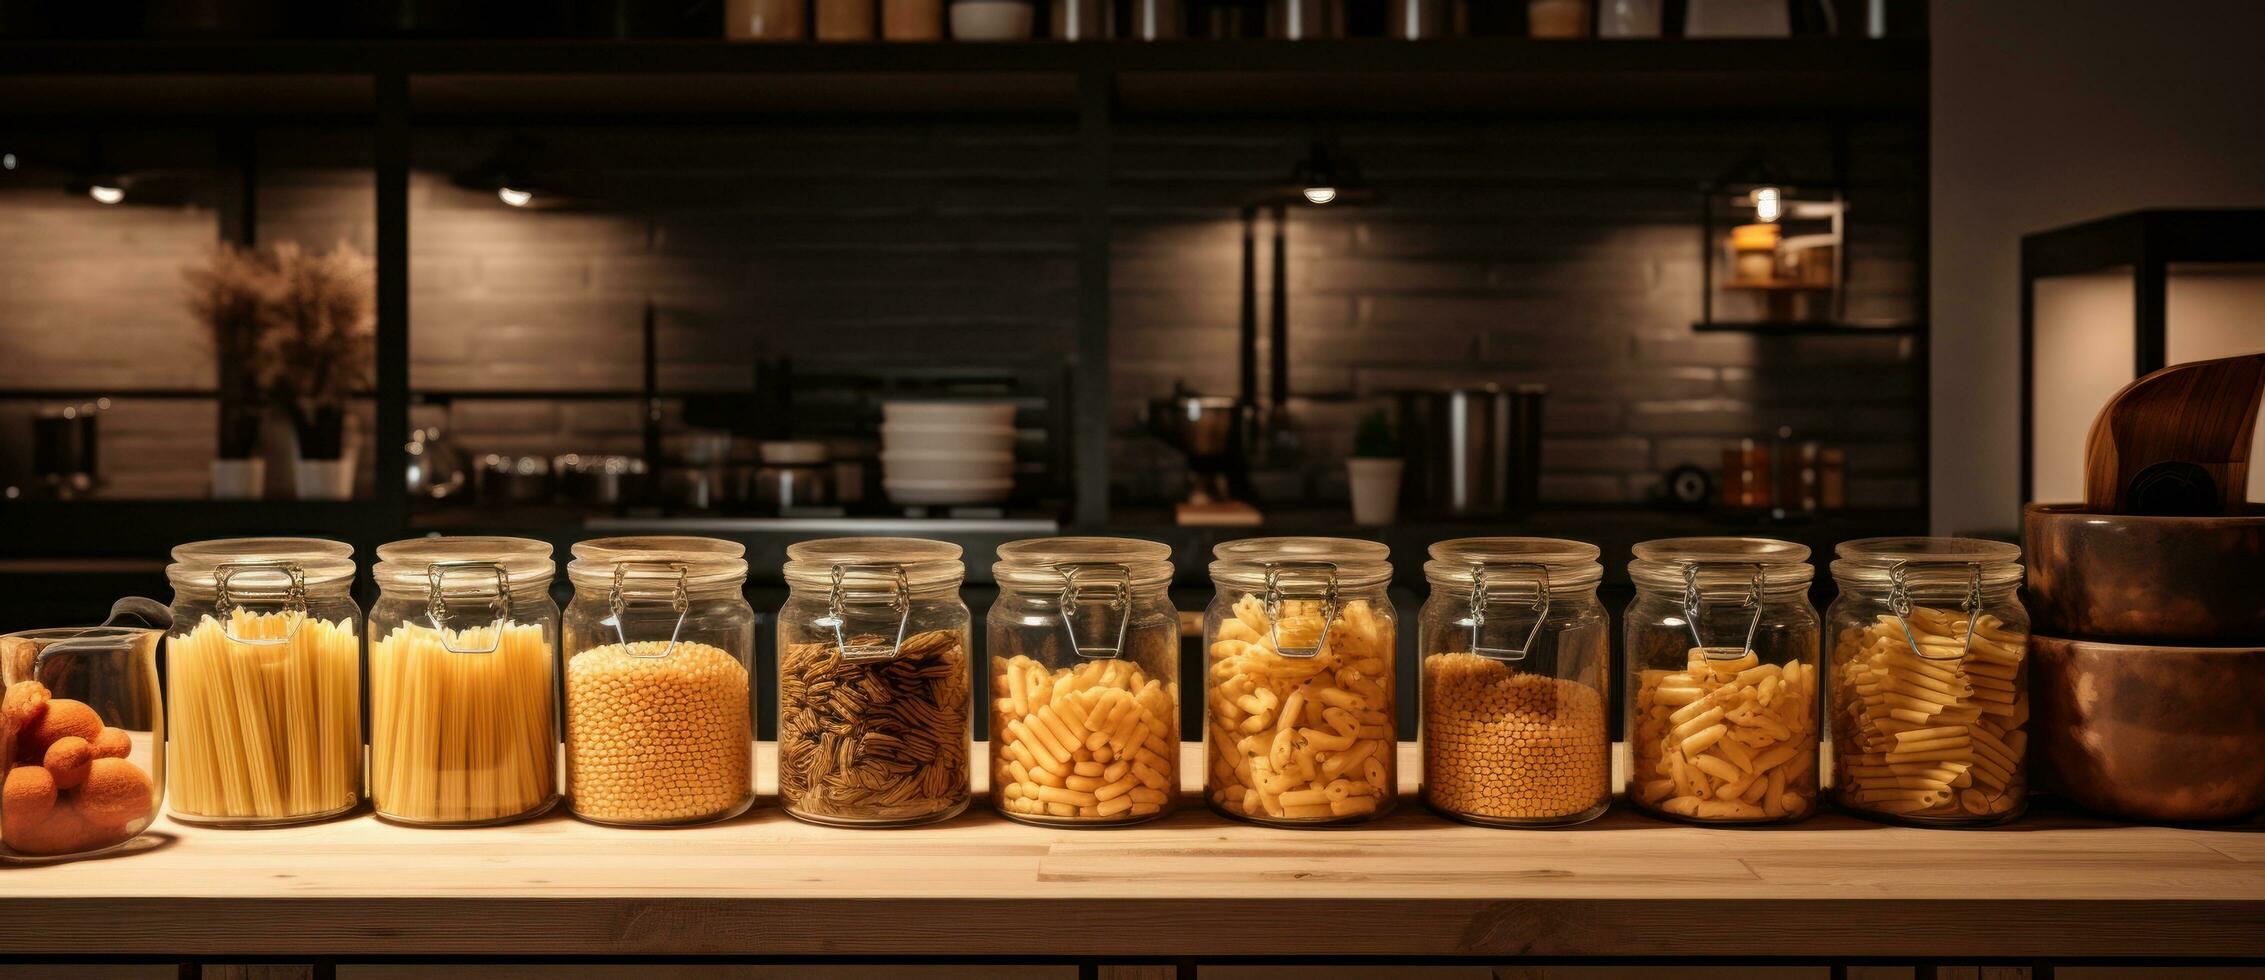 A collection of jars is shown with various pastas in them photo